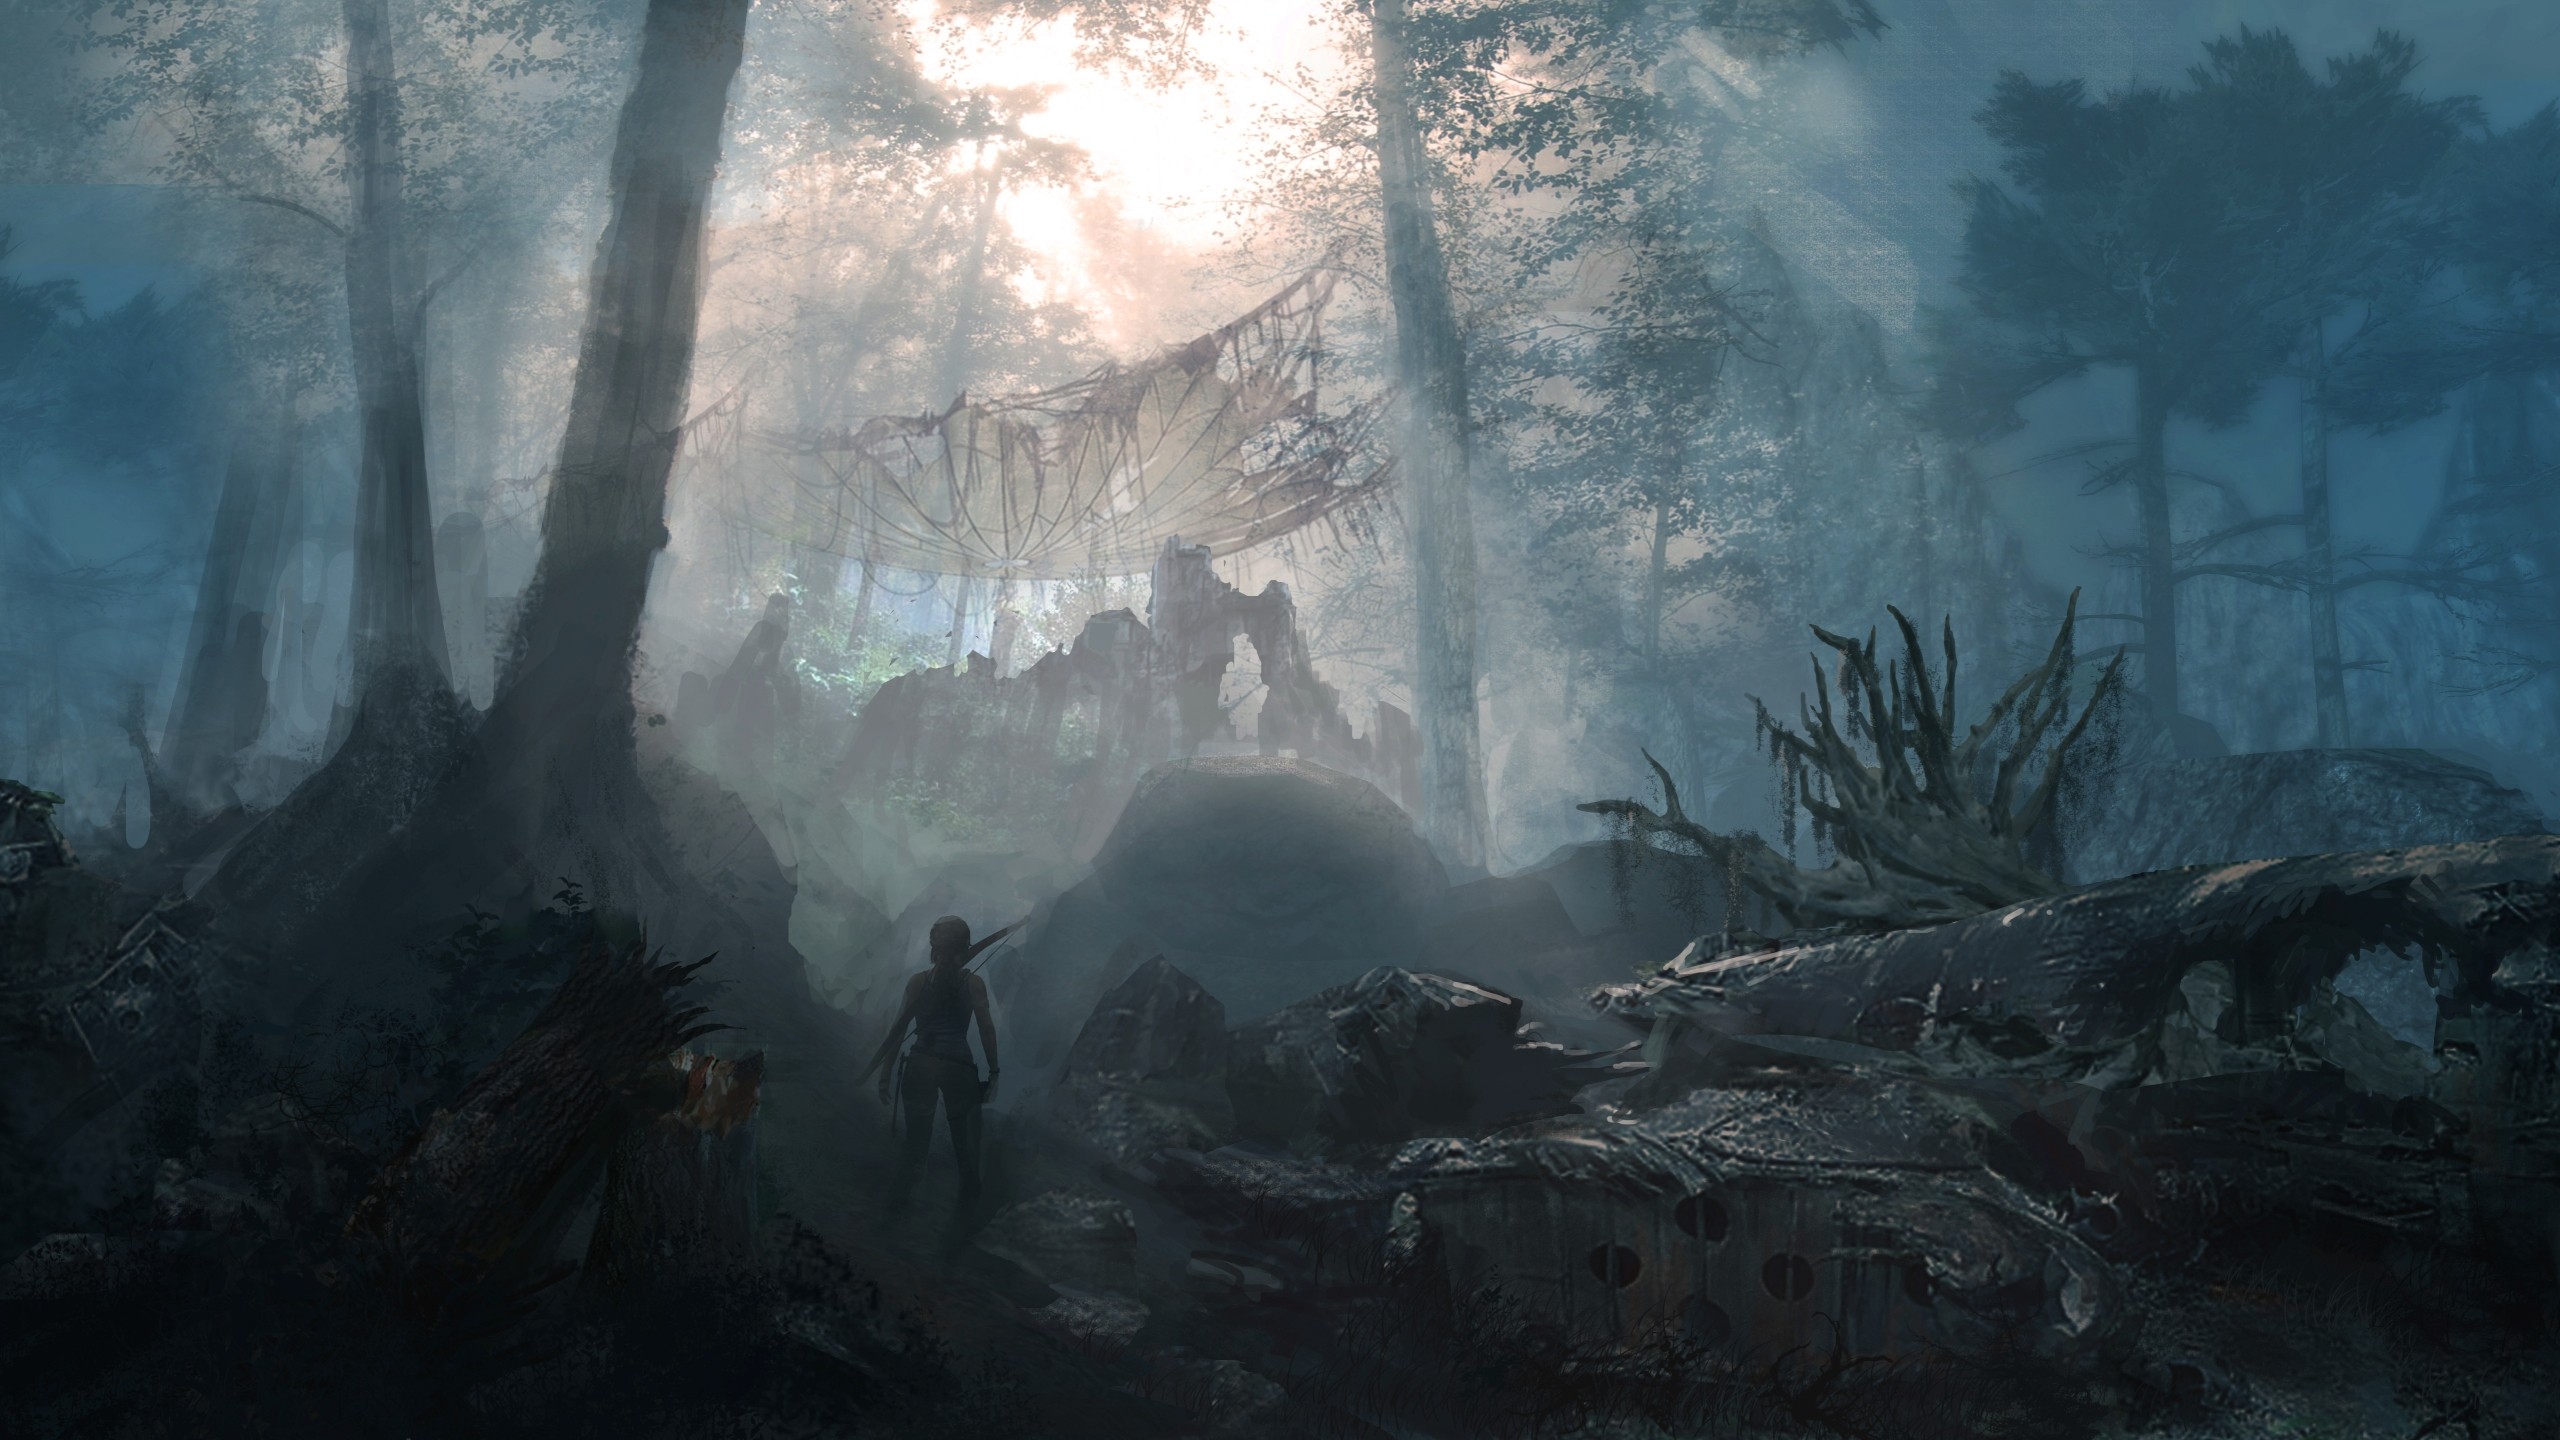 General 2560x1440 Tomb Raider video games Rise of the Tomb Raider PC gaming Lara Croft (Tomb Raider) video game art